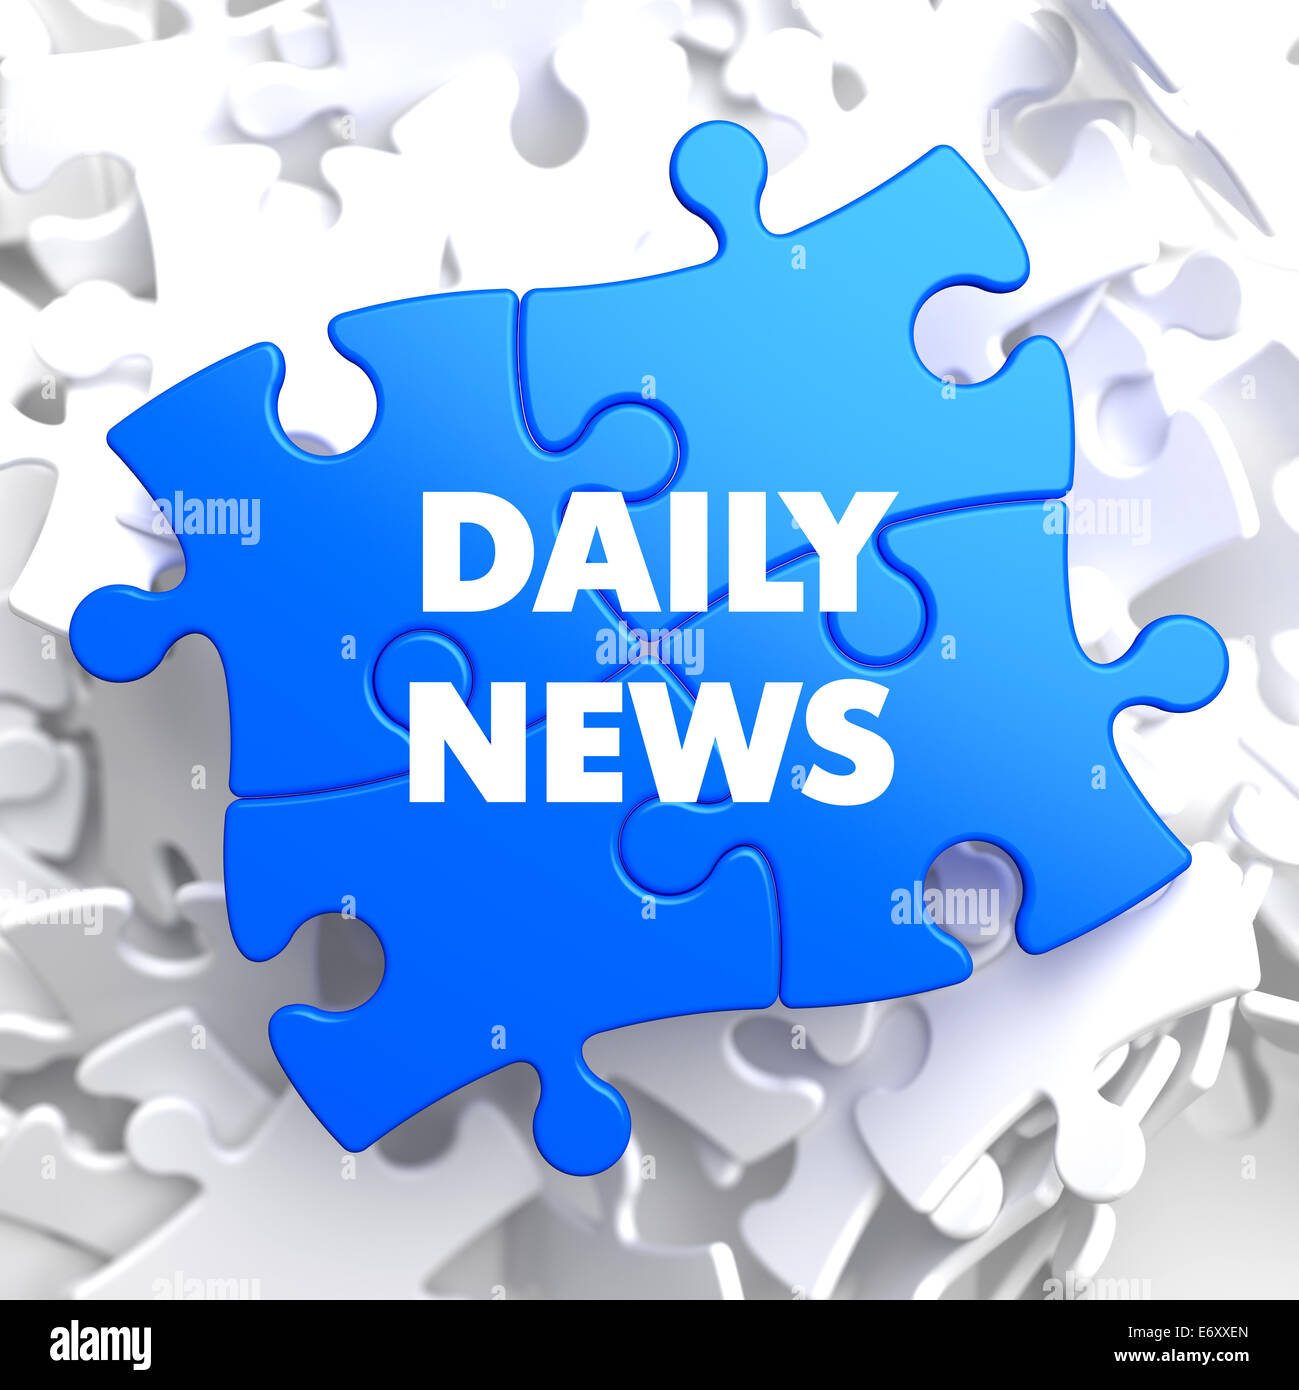 Daily News on Blue Puzzle. Stock Photo